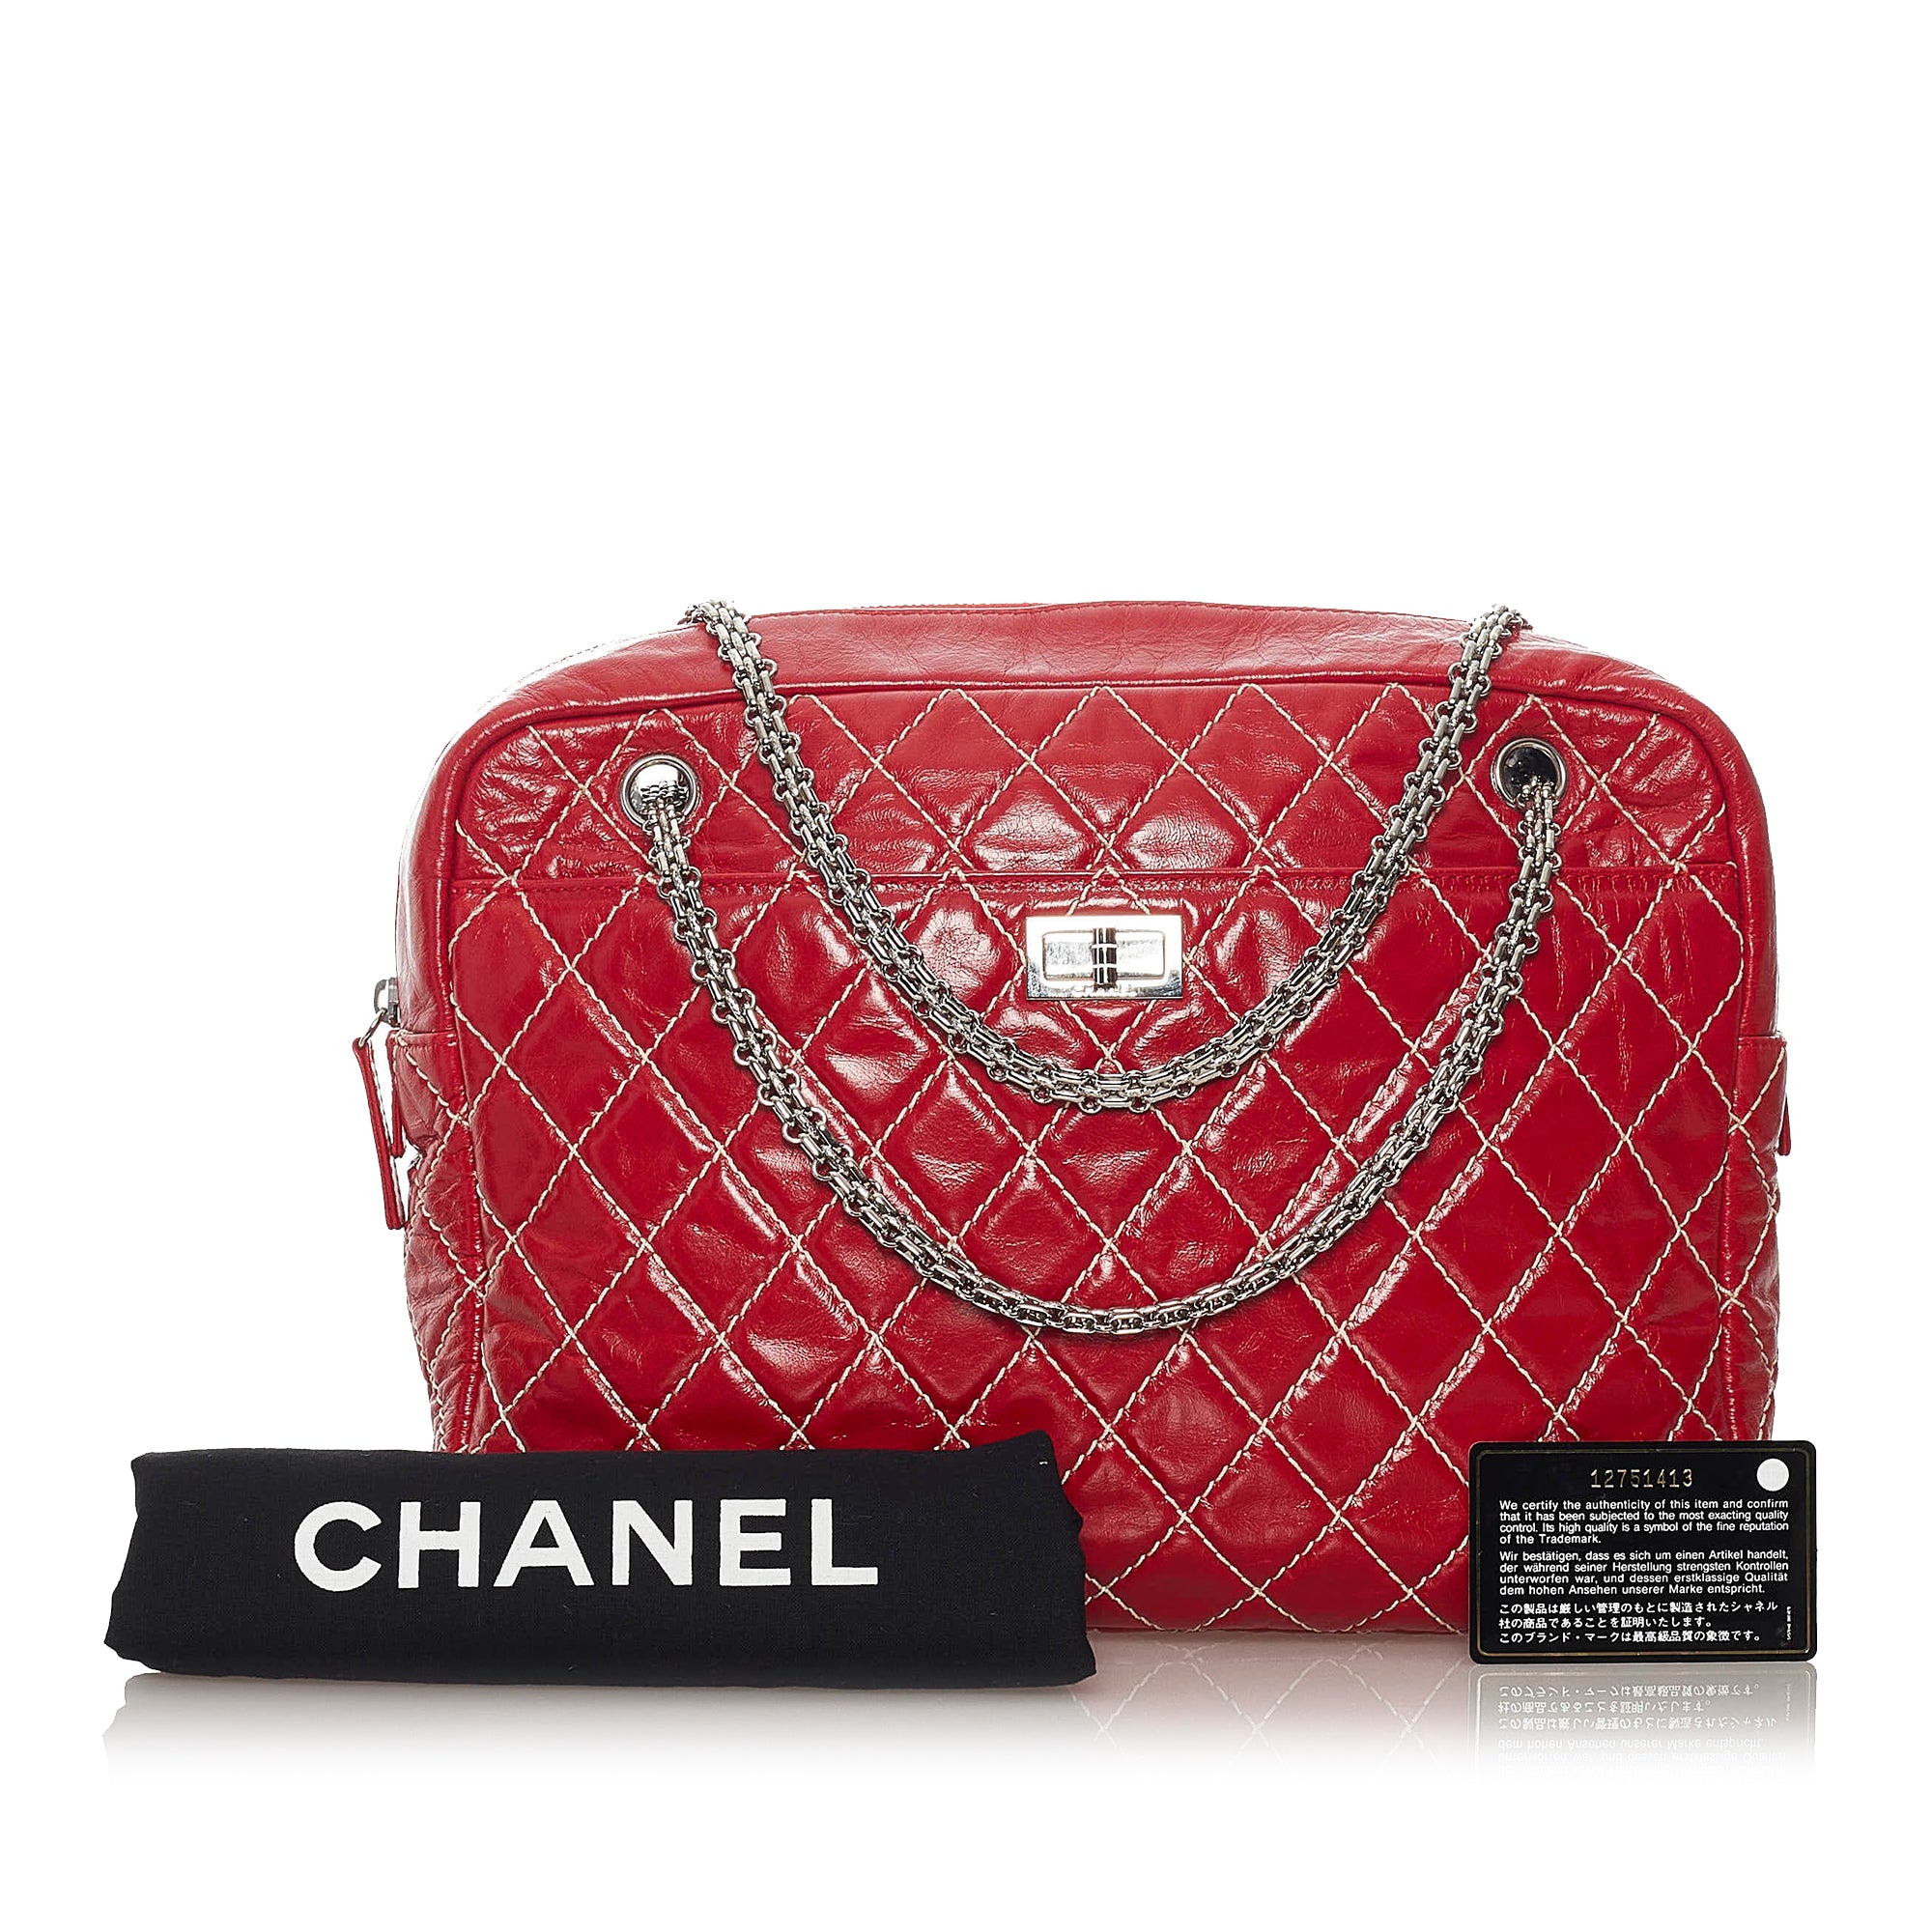 Chanel Large Lambskin Quilted Bowling Bag